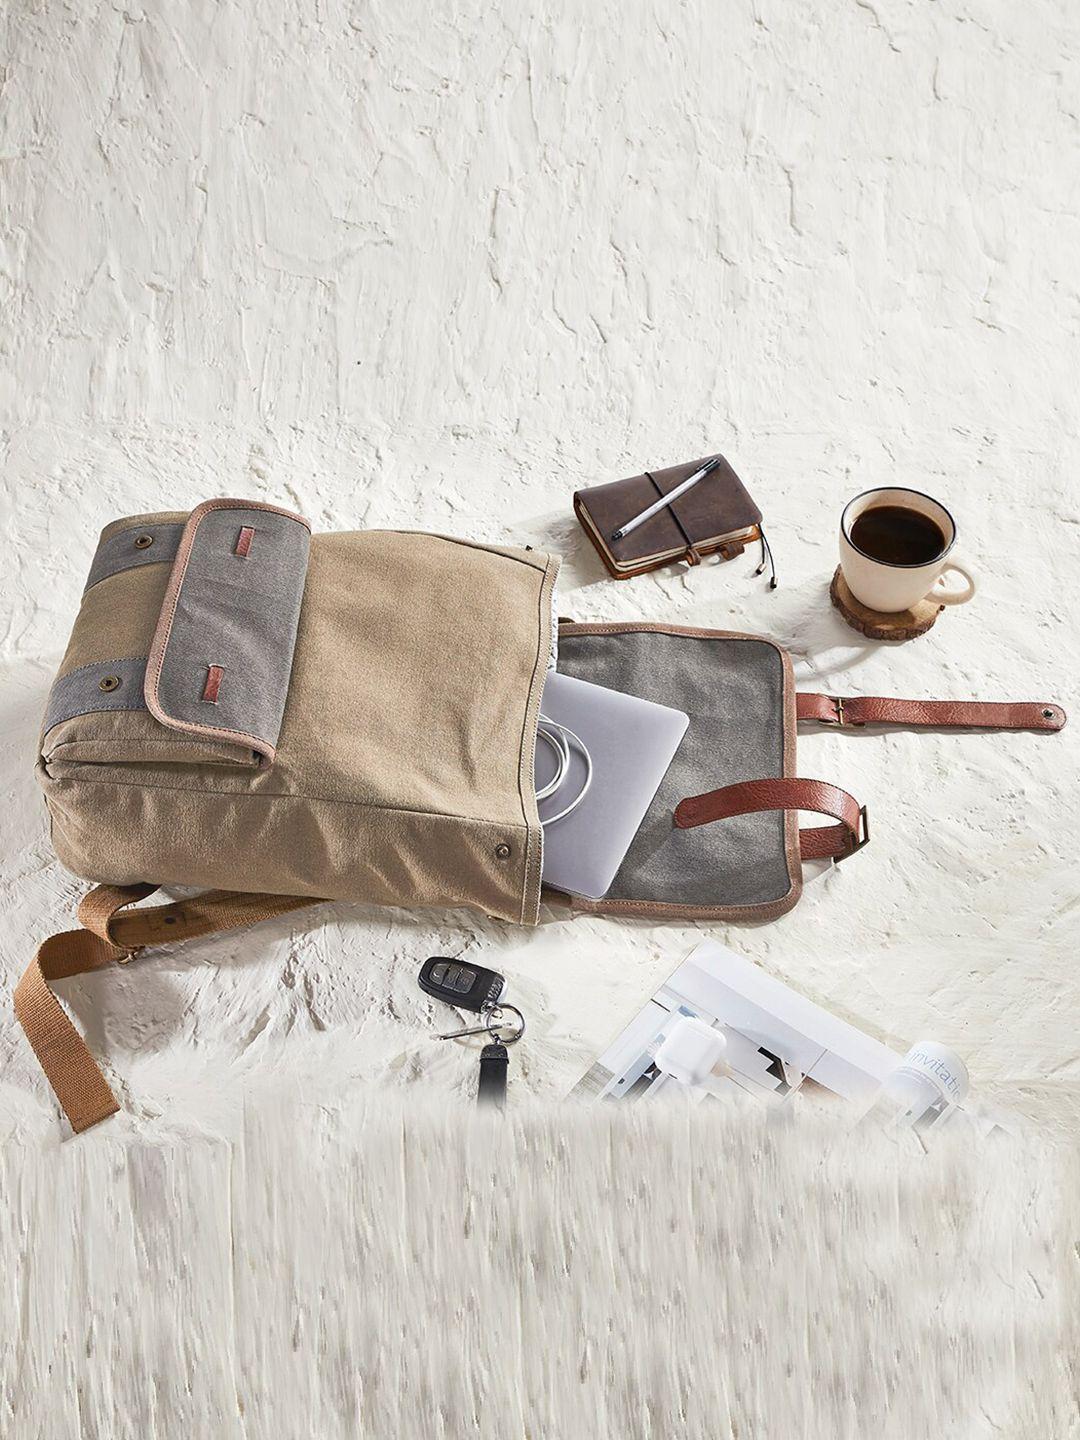 mona b unisex brown & grey backpack with laptop sleeve